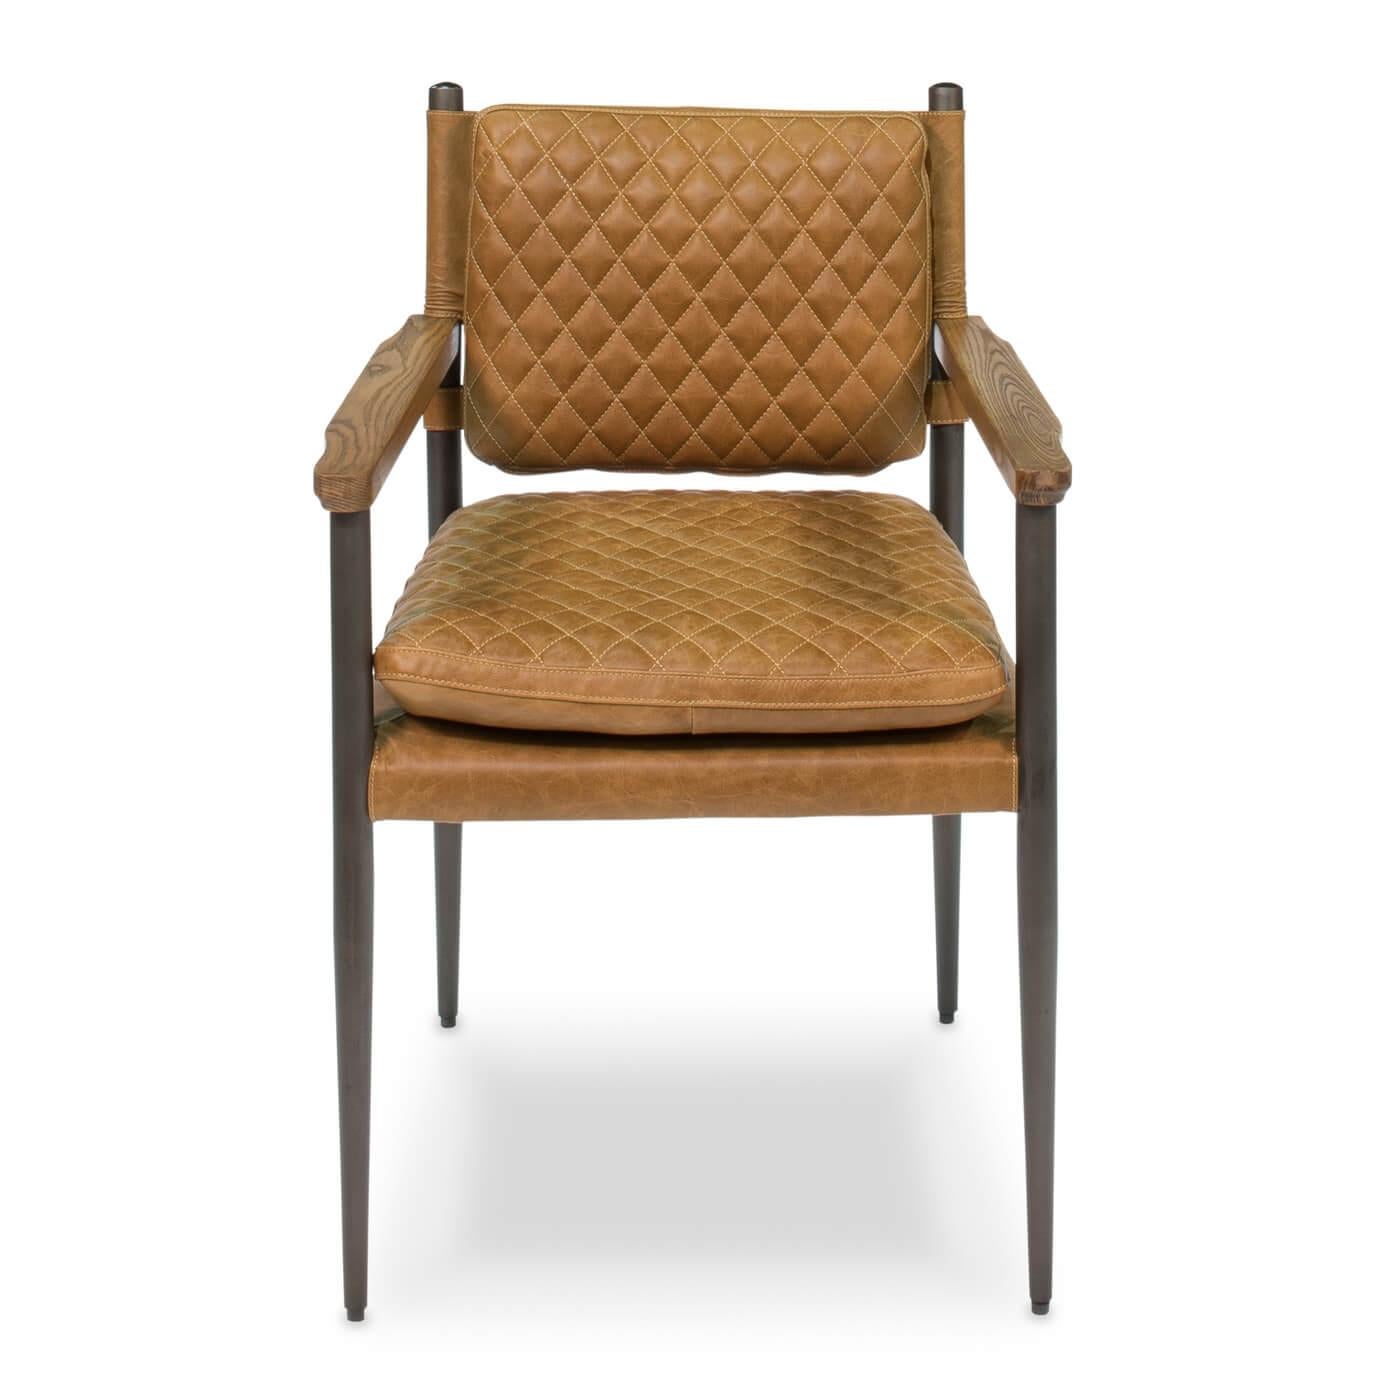 Mid-Century Modern style metal and leather armchair, sleek steel grey frame with wood arms, and quilted leather seat and back. 

Crafted in pure aniline top-grade cow leather in a warm golden brown tone.

Dimensions: 23